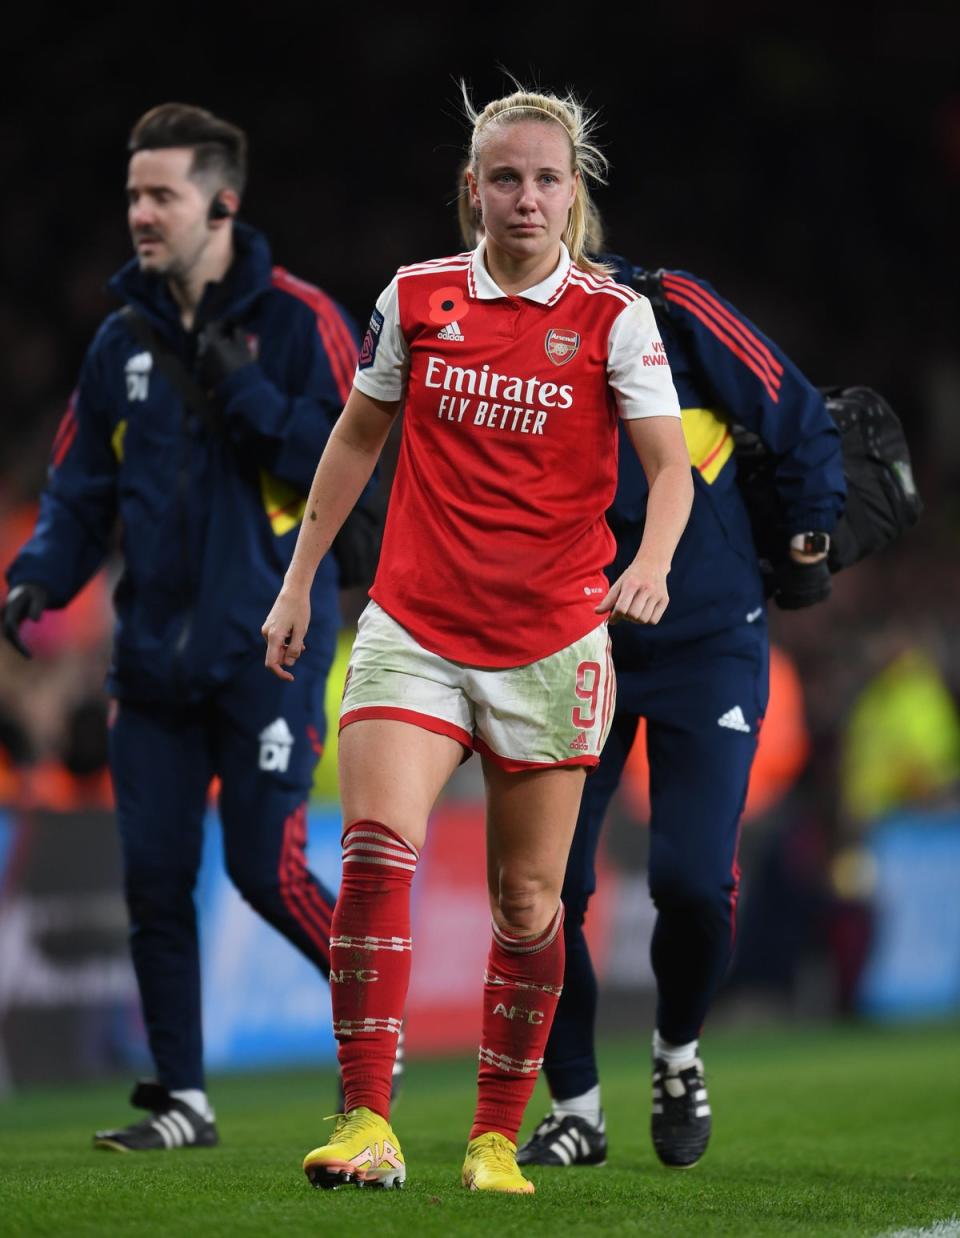 Beth Mead ruptured her ACL against Manchester United last November. (Arsenal FC via Getty Images)